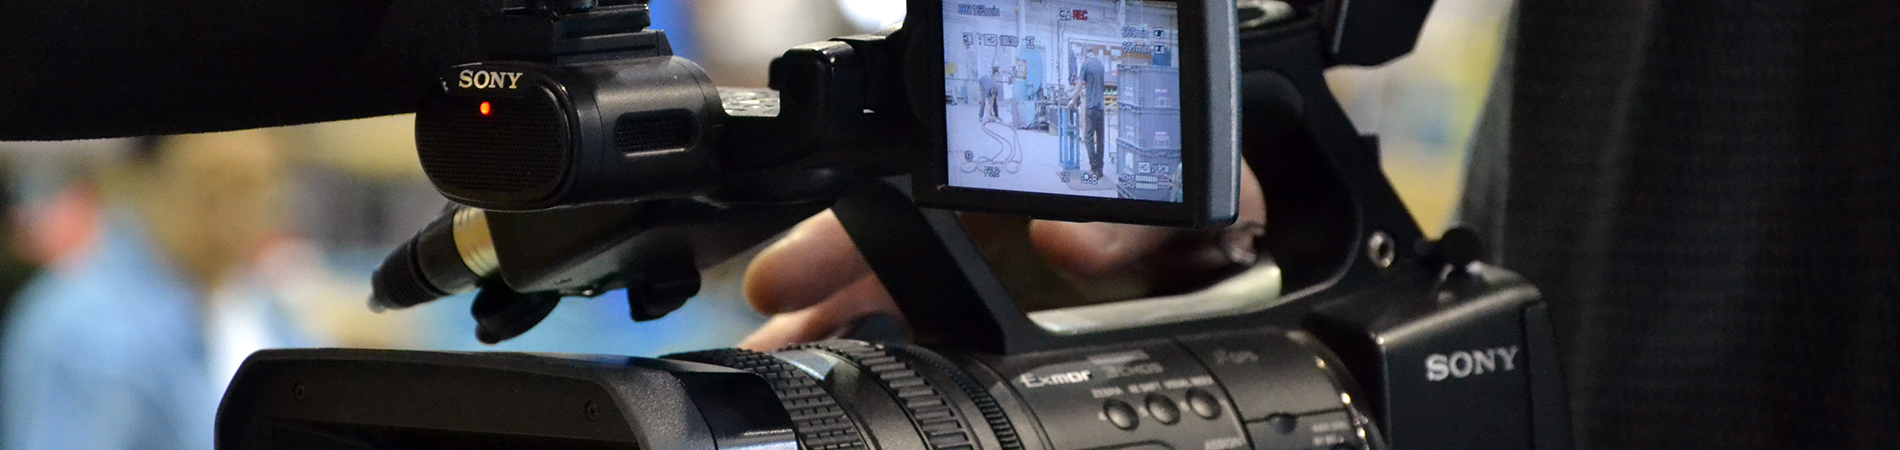 All of our production equipment is designed only for professional video production.